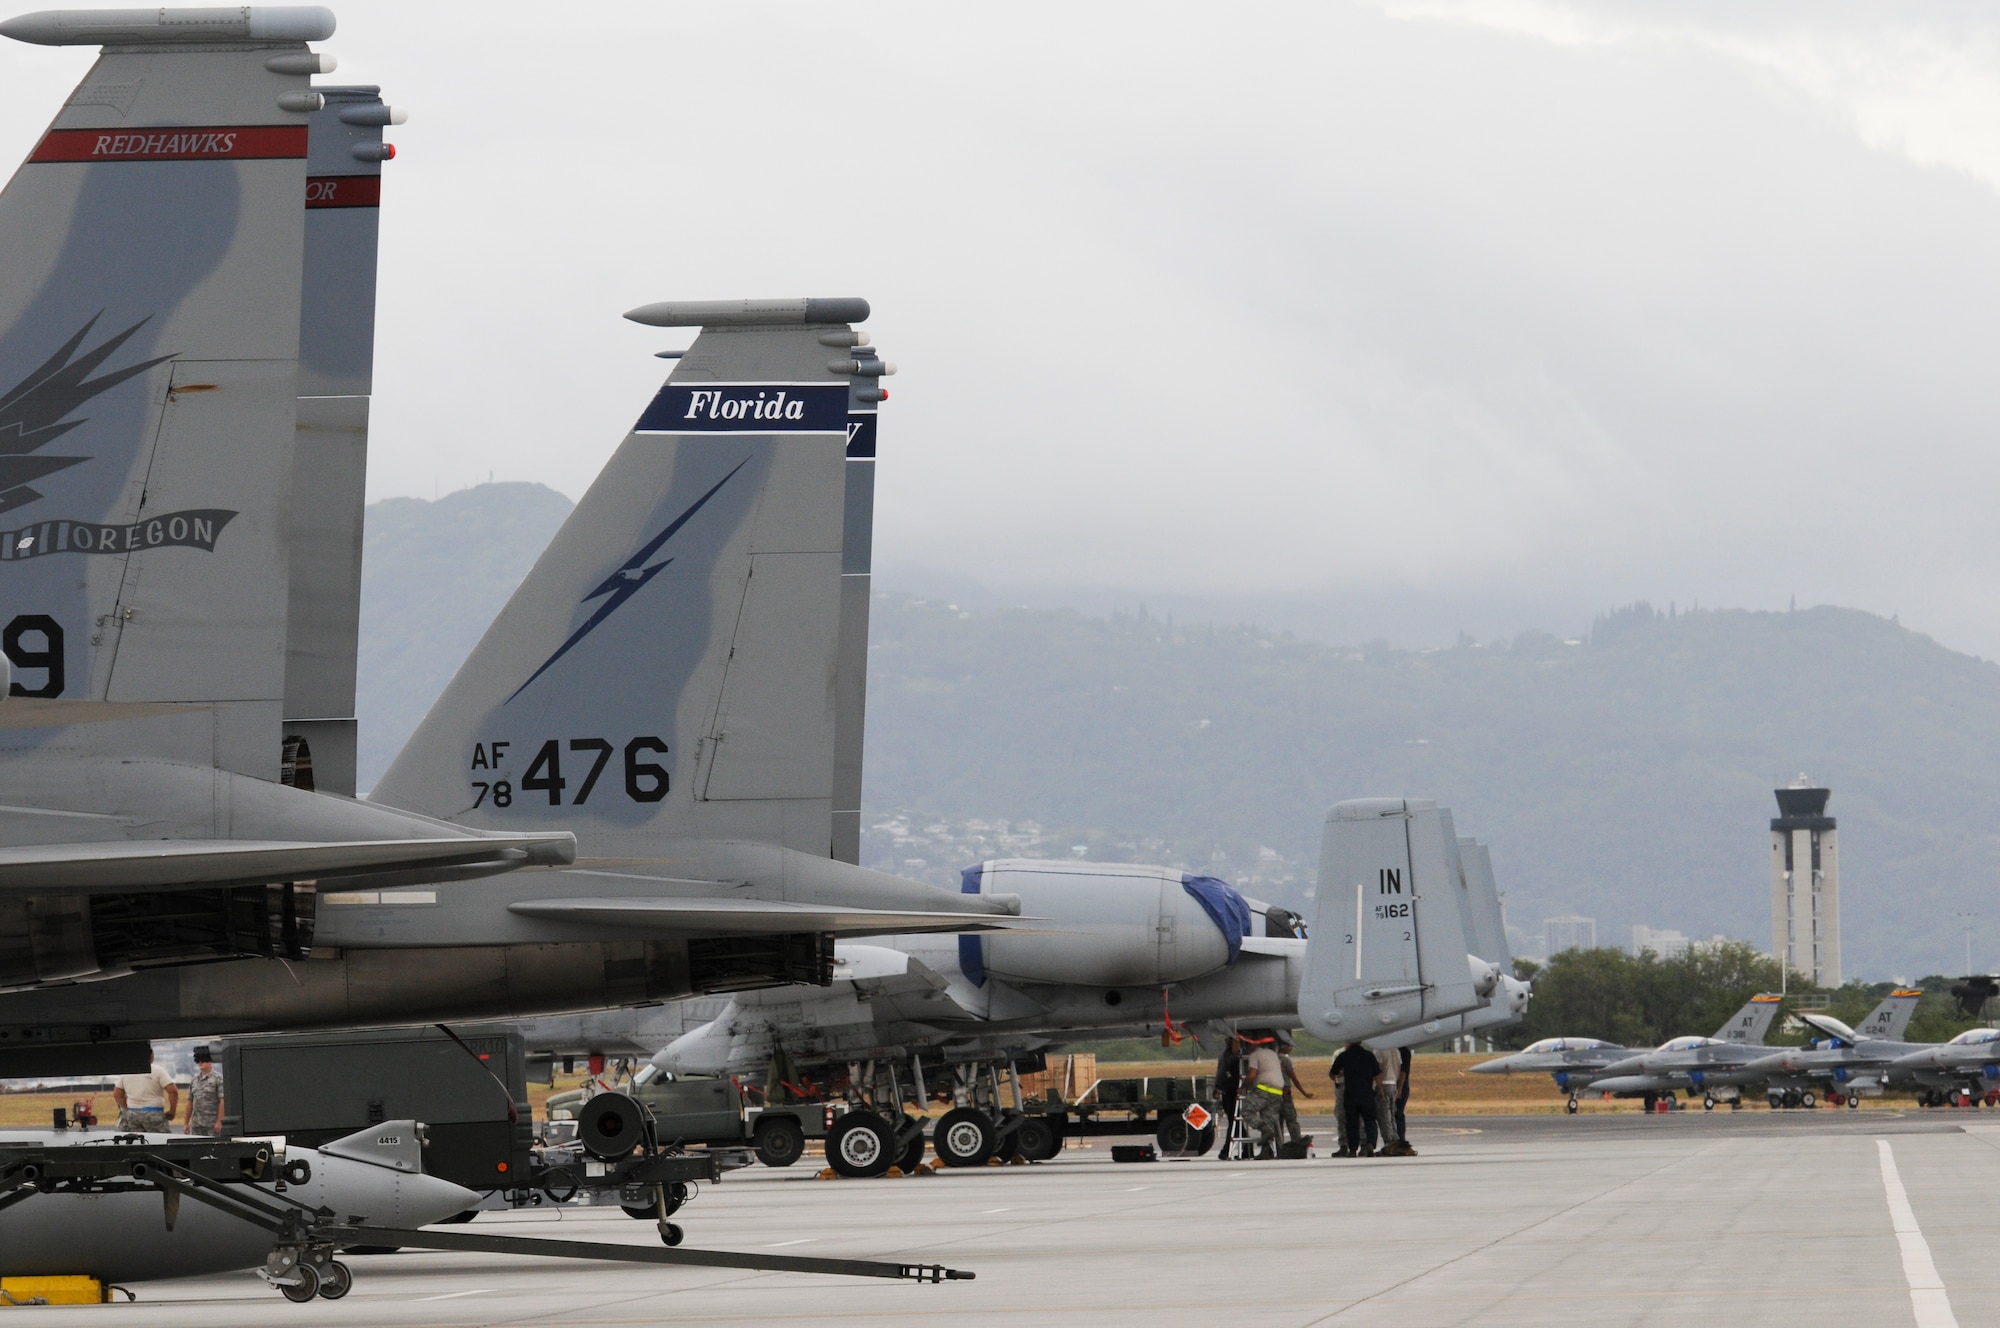 F-15 Eagles from Oregon and Florida, and A-10 Thunderbolts and F-16 Fighting Falcons from Arizona line the flight line at Joint Base Pearl Harbor-Hickam, Hawaii, March 4, 2015. The aircraft are participating in the Hawaii Air National Guard's Sentry Aloha fighter exercise. Sentry Aloha's mission is to provide the ANG, Air Force and DOD counterparts with multifaceted, realistic and integrated training to equip the warfighter with the skillsets necessary to fly, fight and win. (U.S. Air National Guard photo by Senior Airman Orlando Corpuz)

